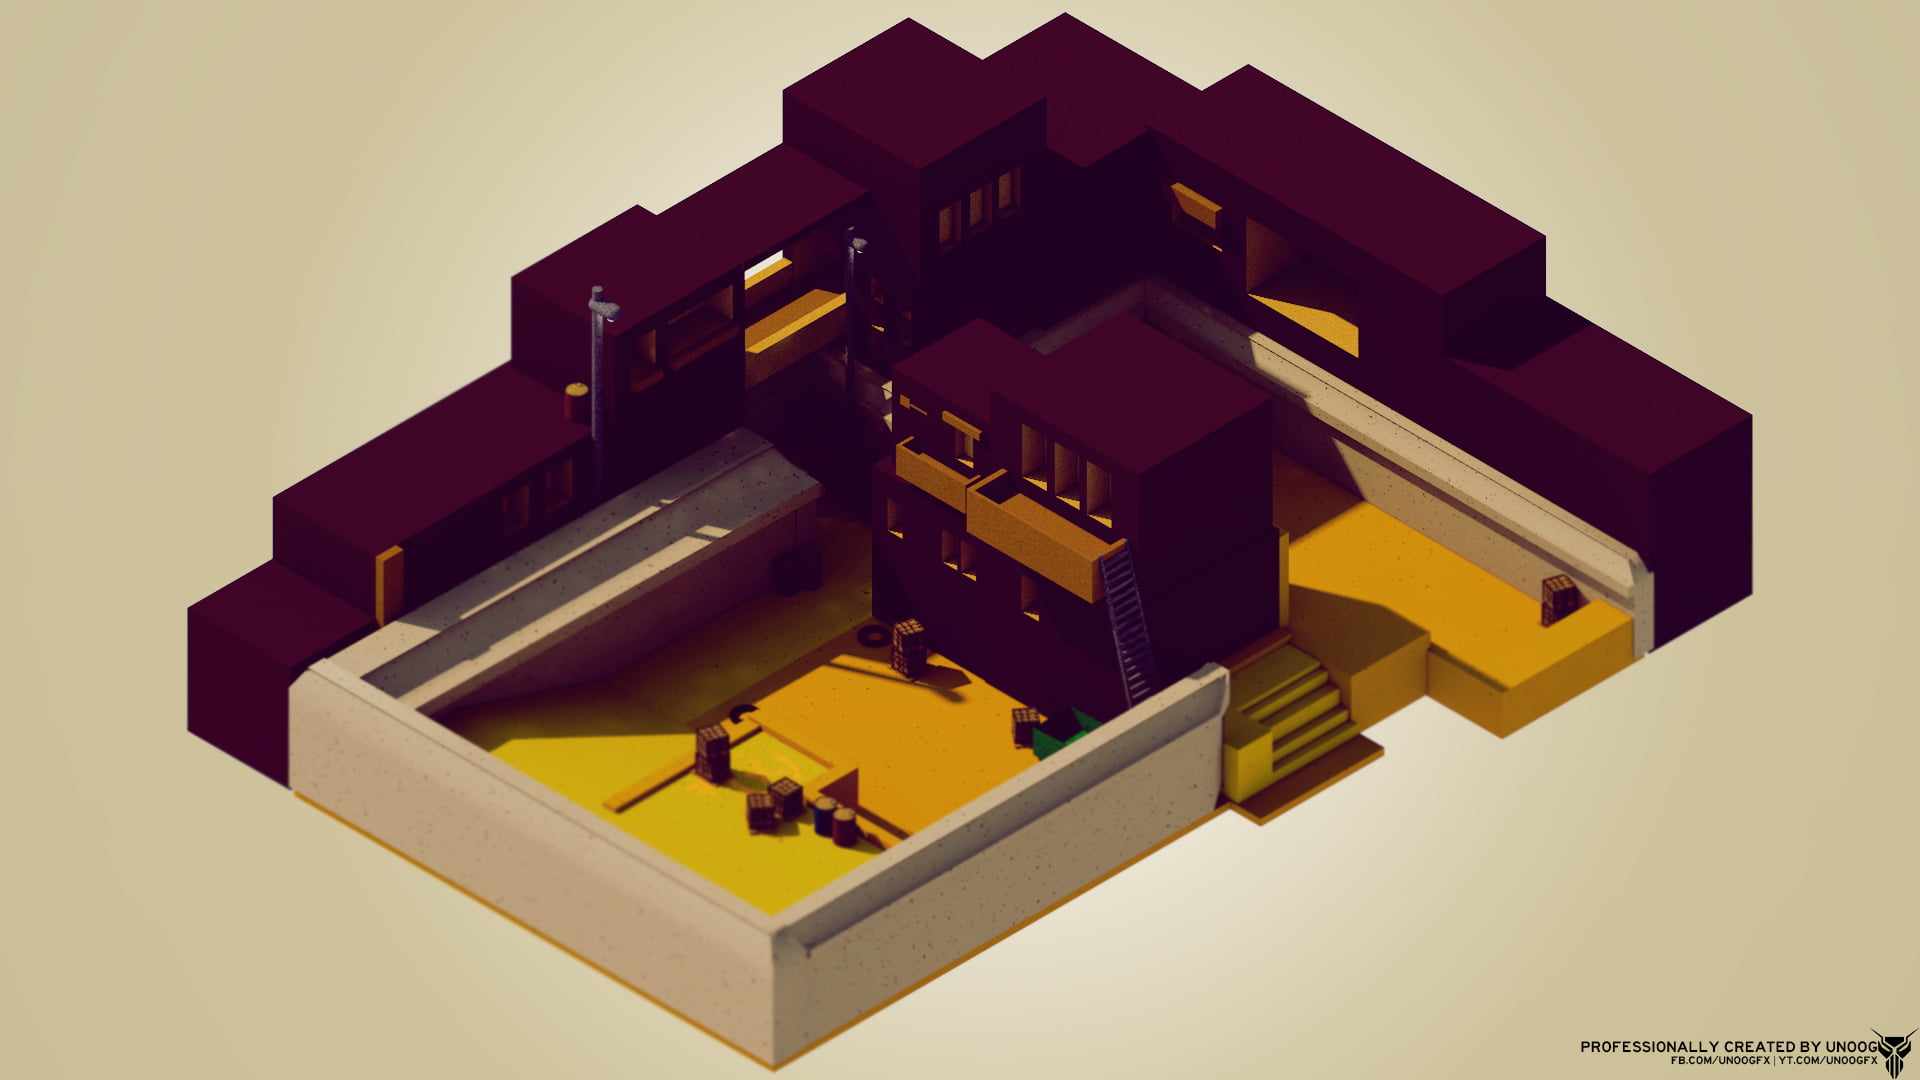 maroon and yellow house 3D plan illustration